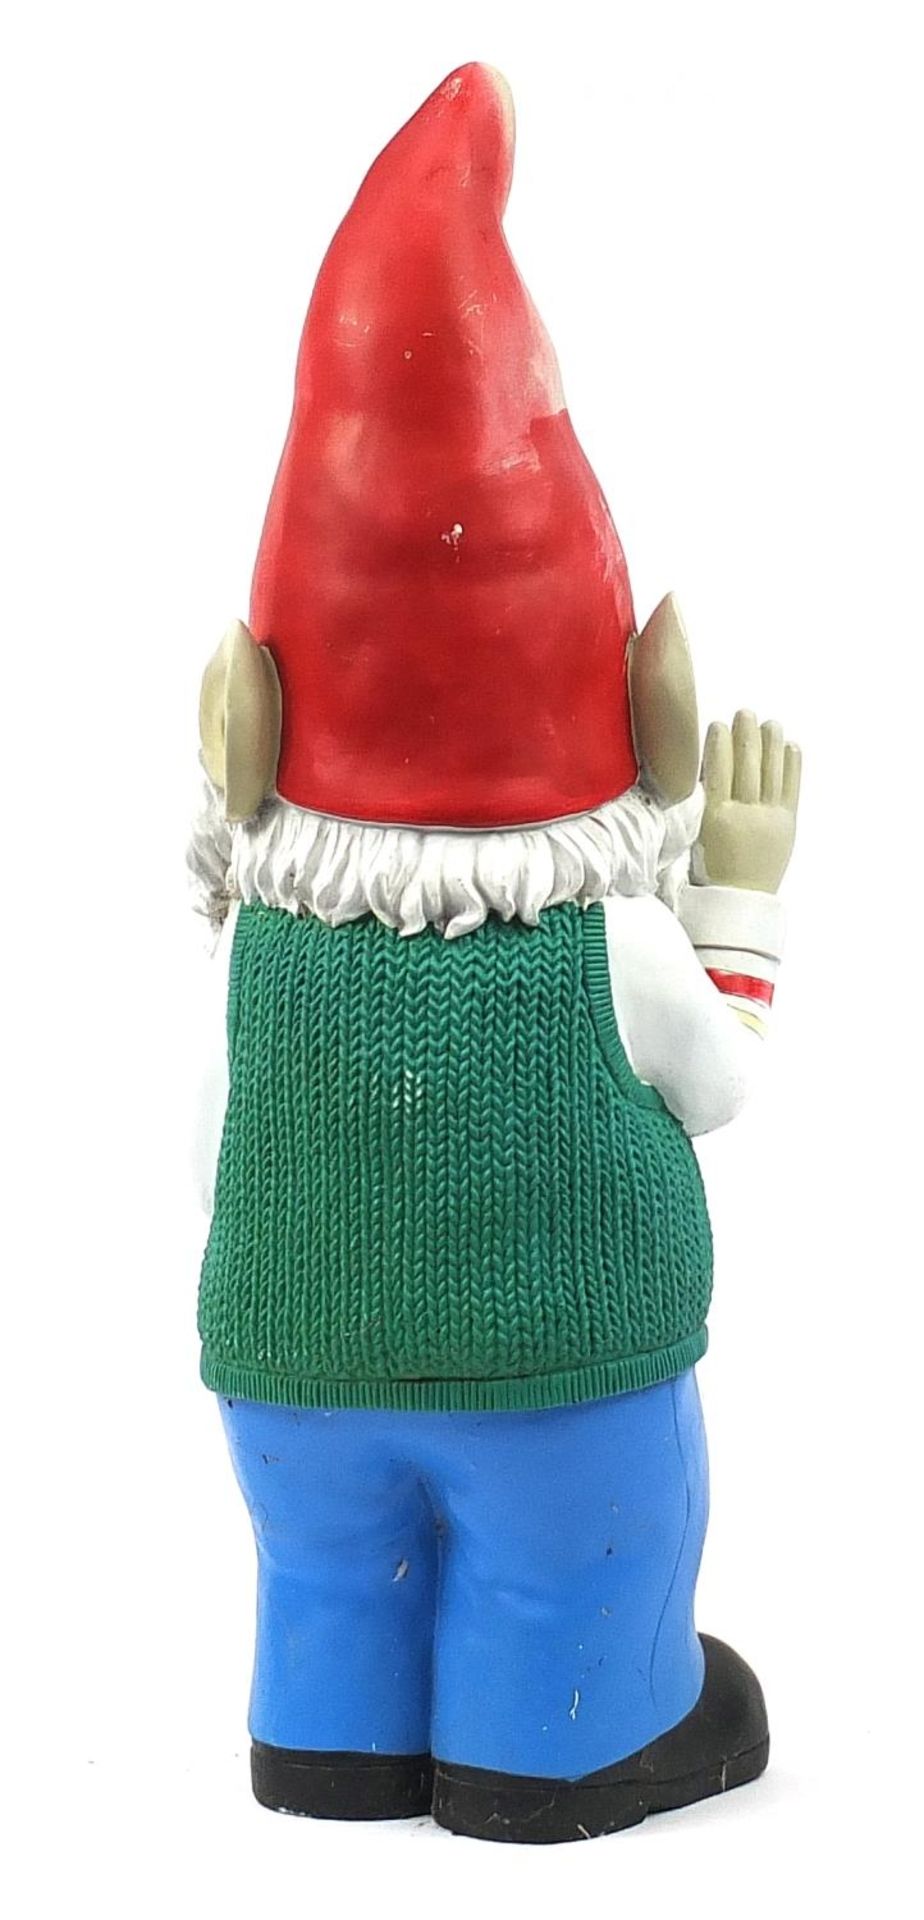 Large garden gnome ornament, 87cm high - Image 2 of 3